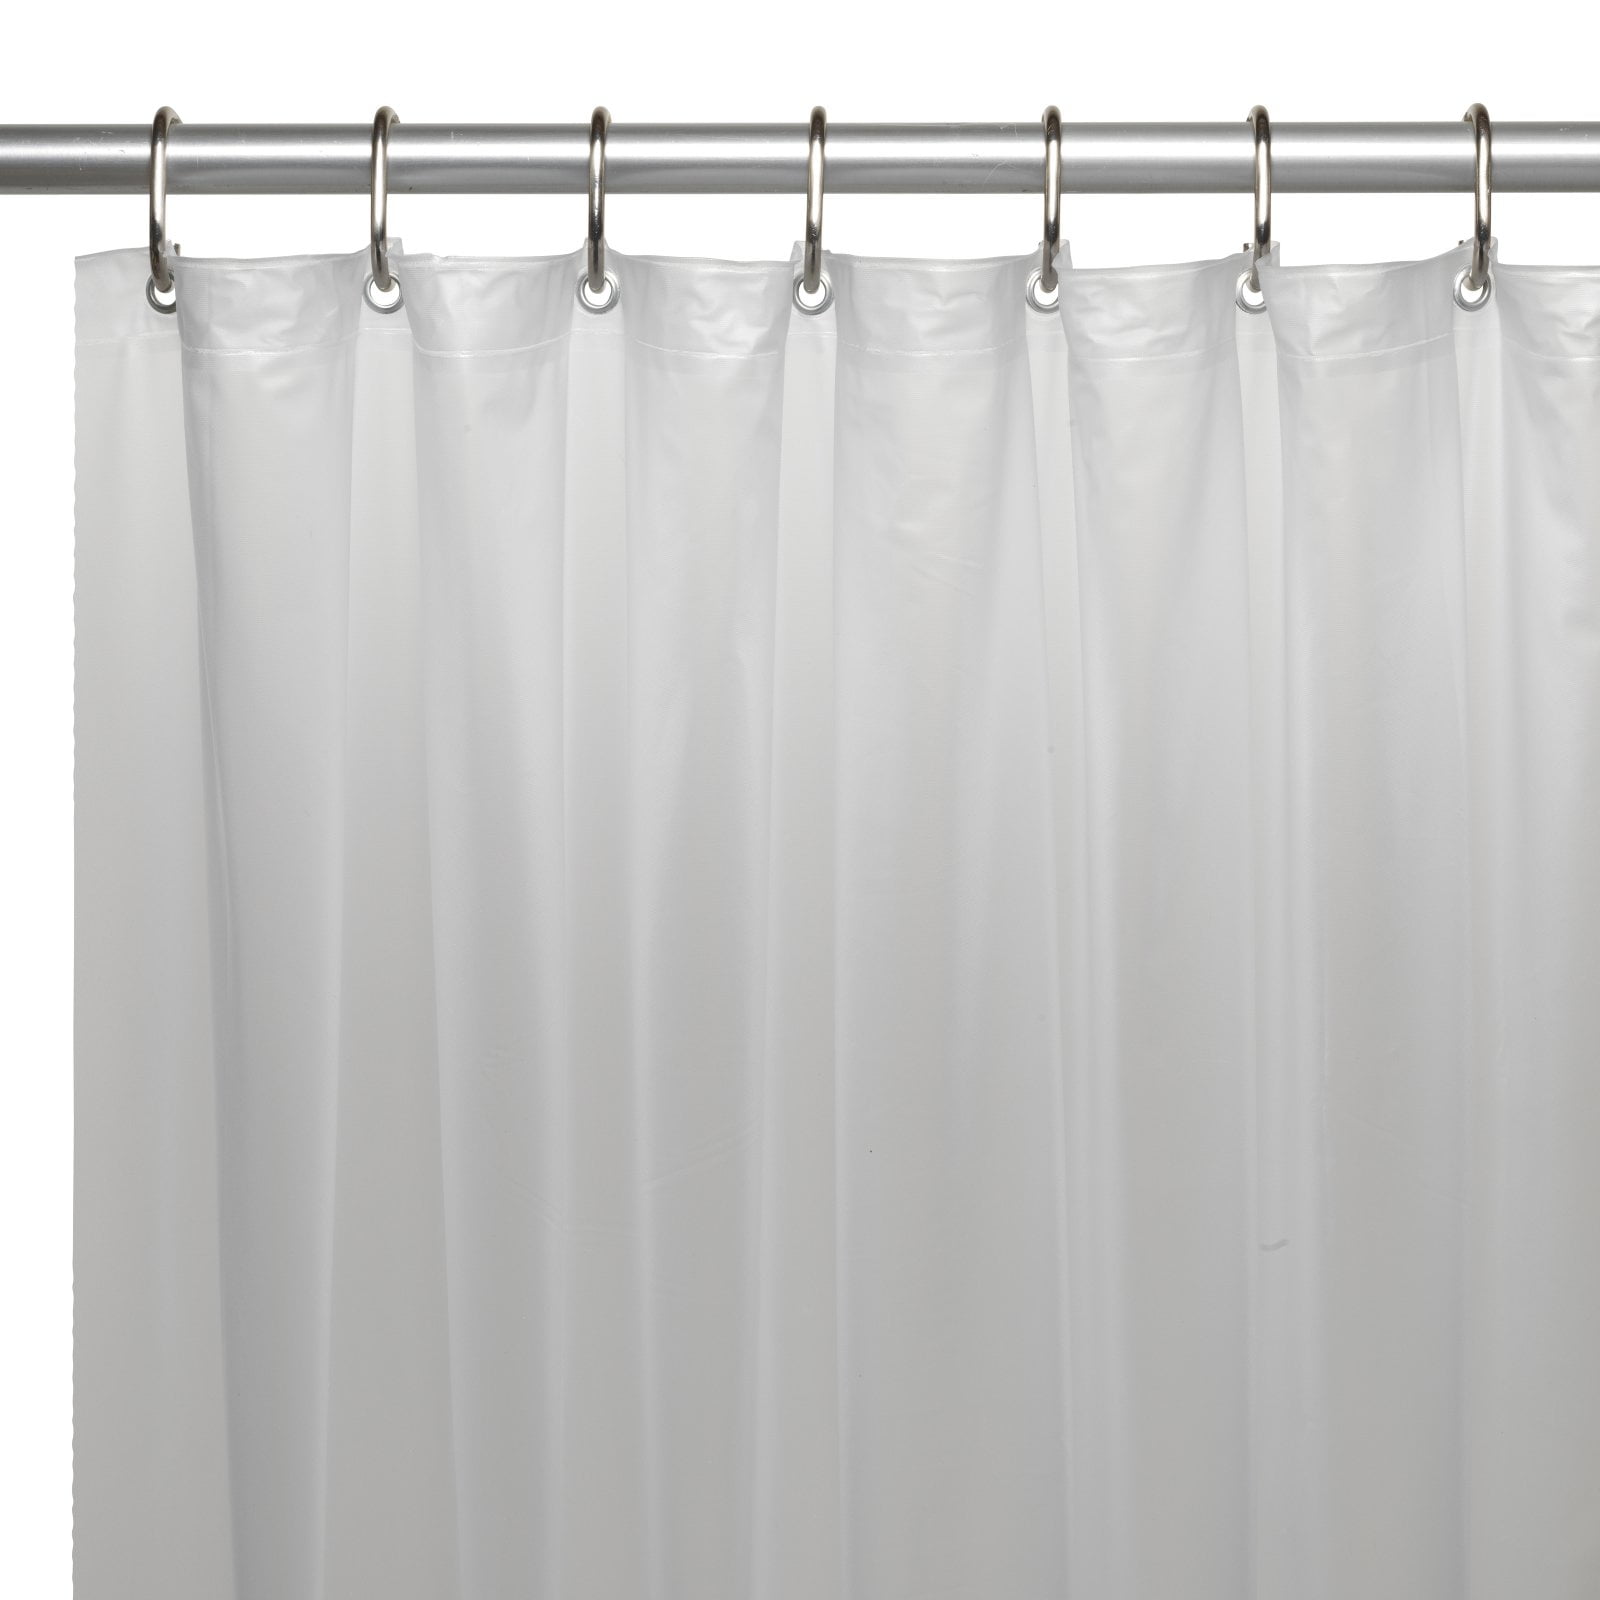 LiBa Heavy Duty 10G Clear Shower Curtain Liner Mold and Mildew Resistant 72x72 